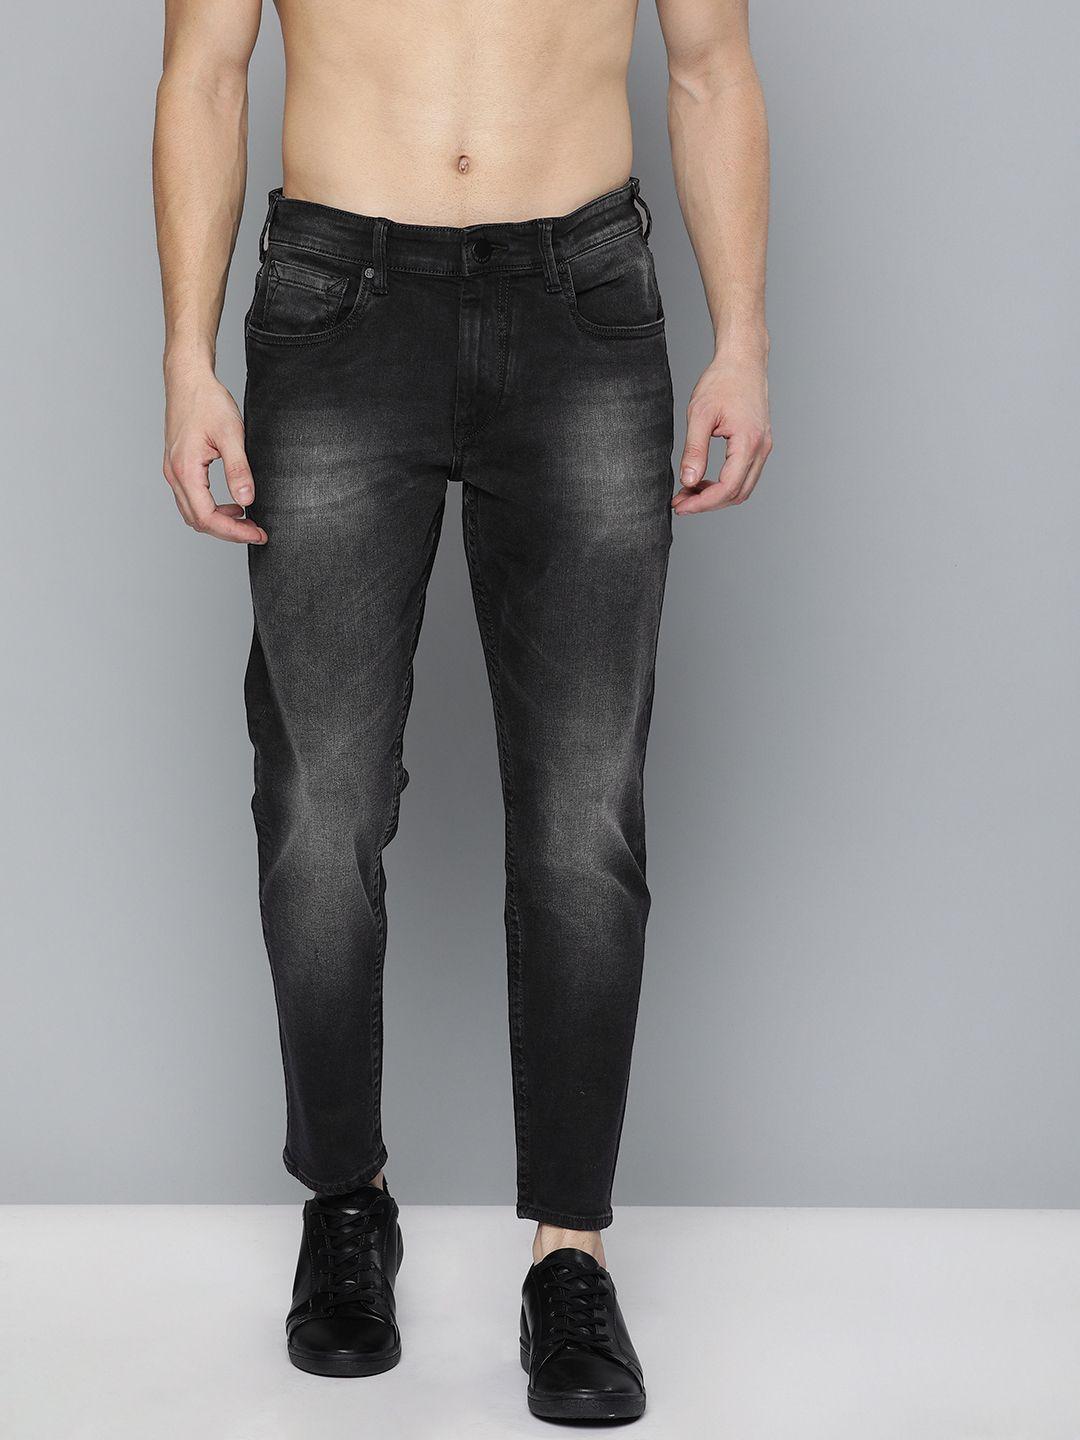 here&now-men-black-slim-tapered-fit-mid-rise-clean-look-stretchable-ankle-length-jeans